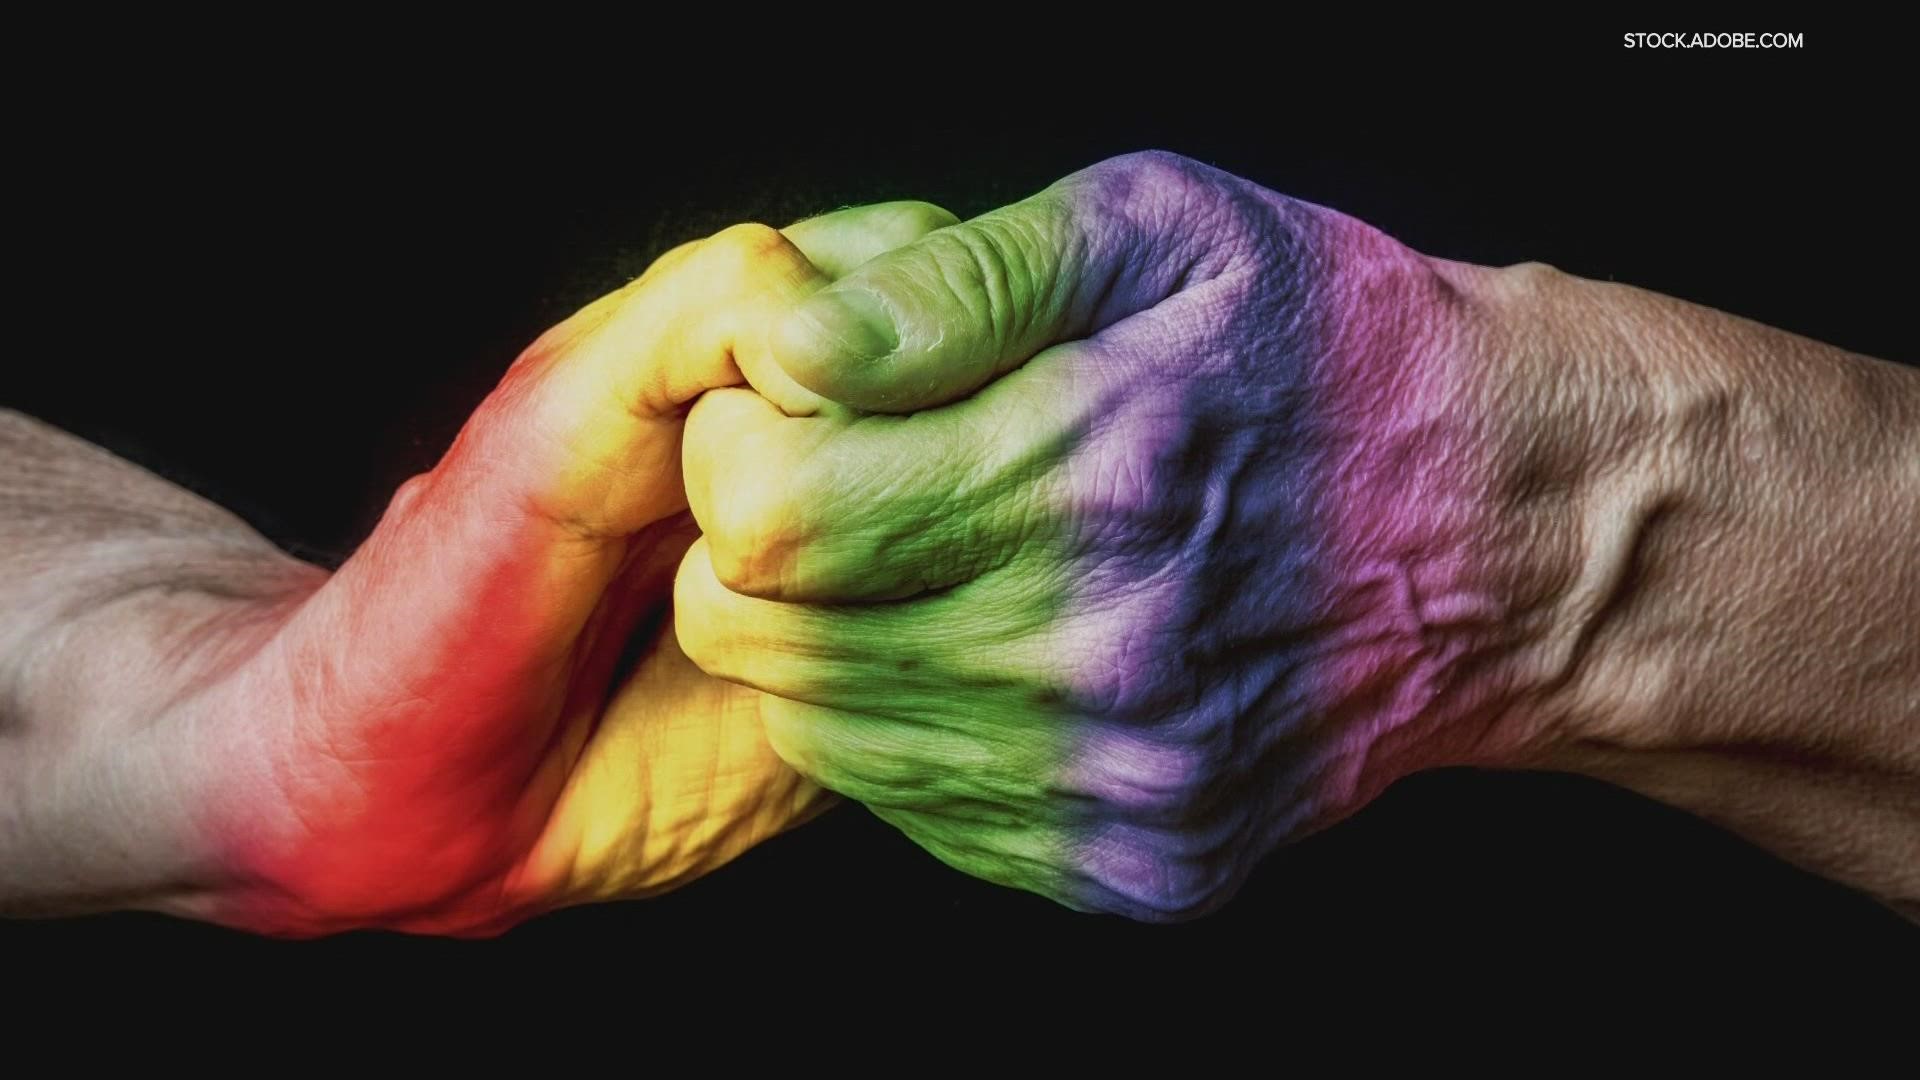 A first-of-its-kind report from the state provides key statistical insight into the needs of older adults in the LGBTQ+ community.